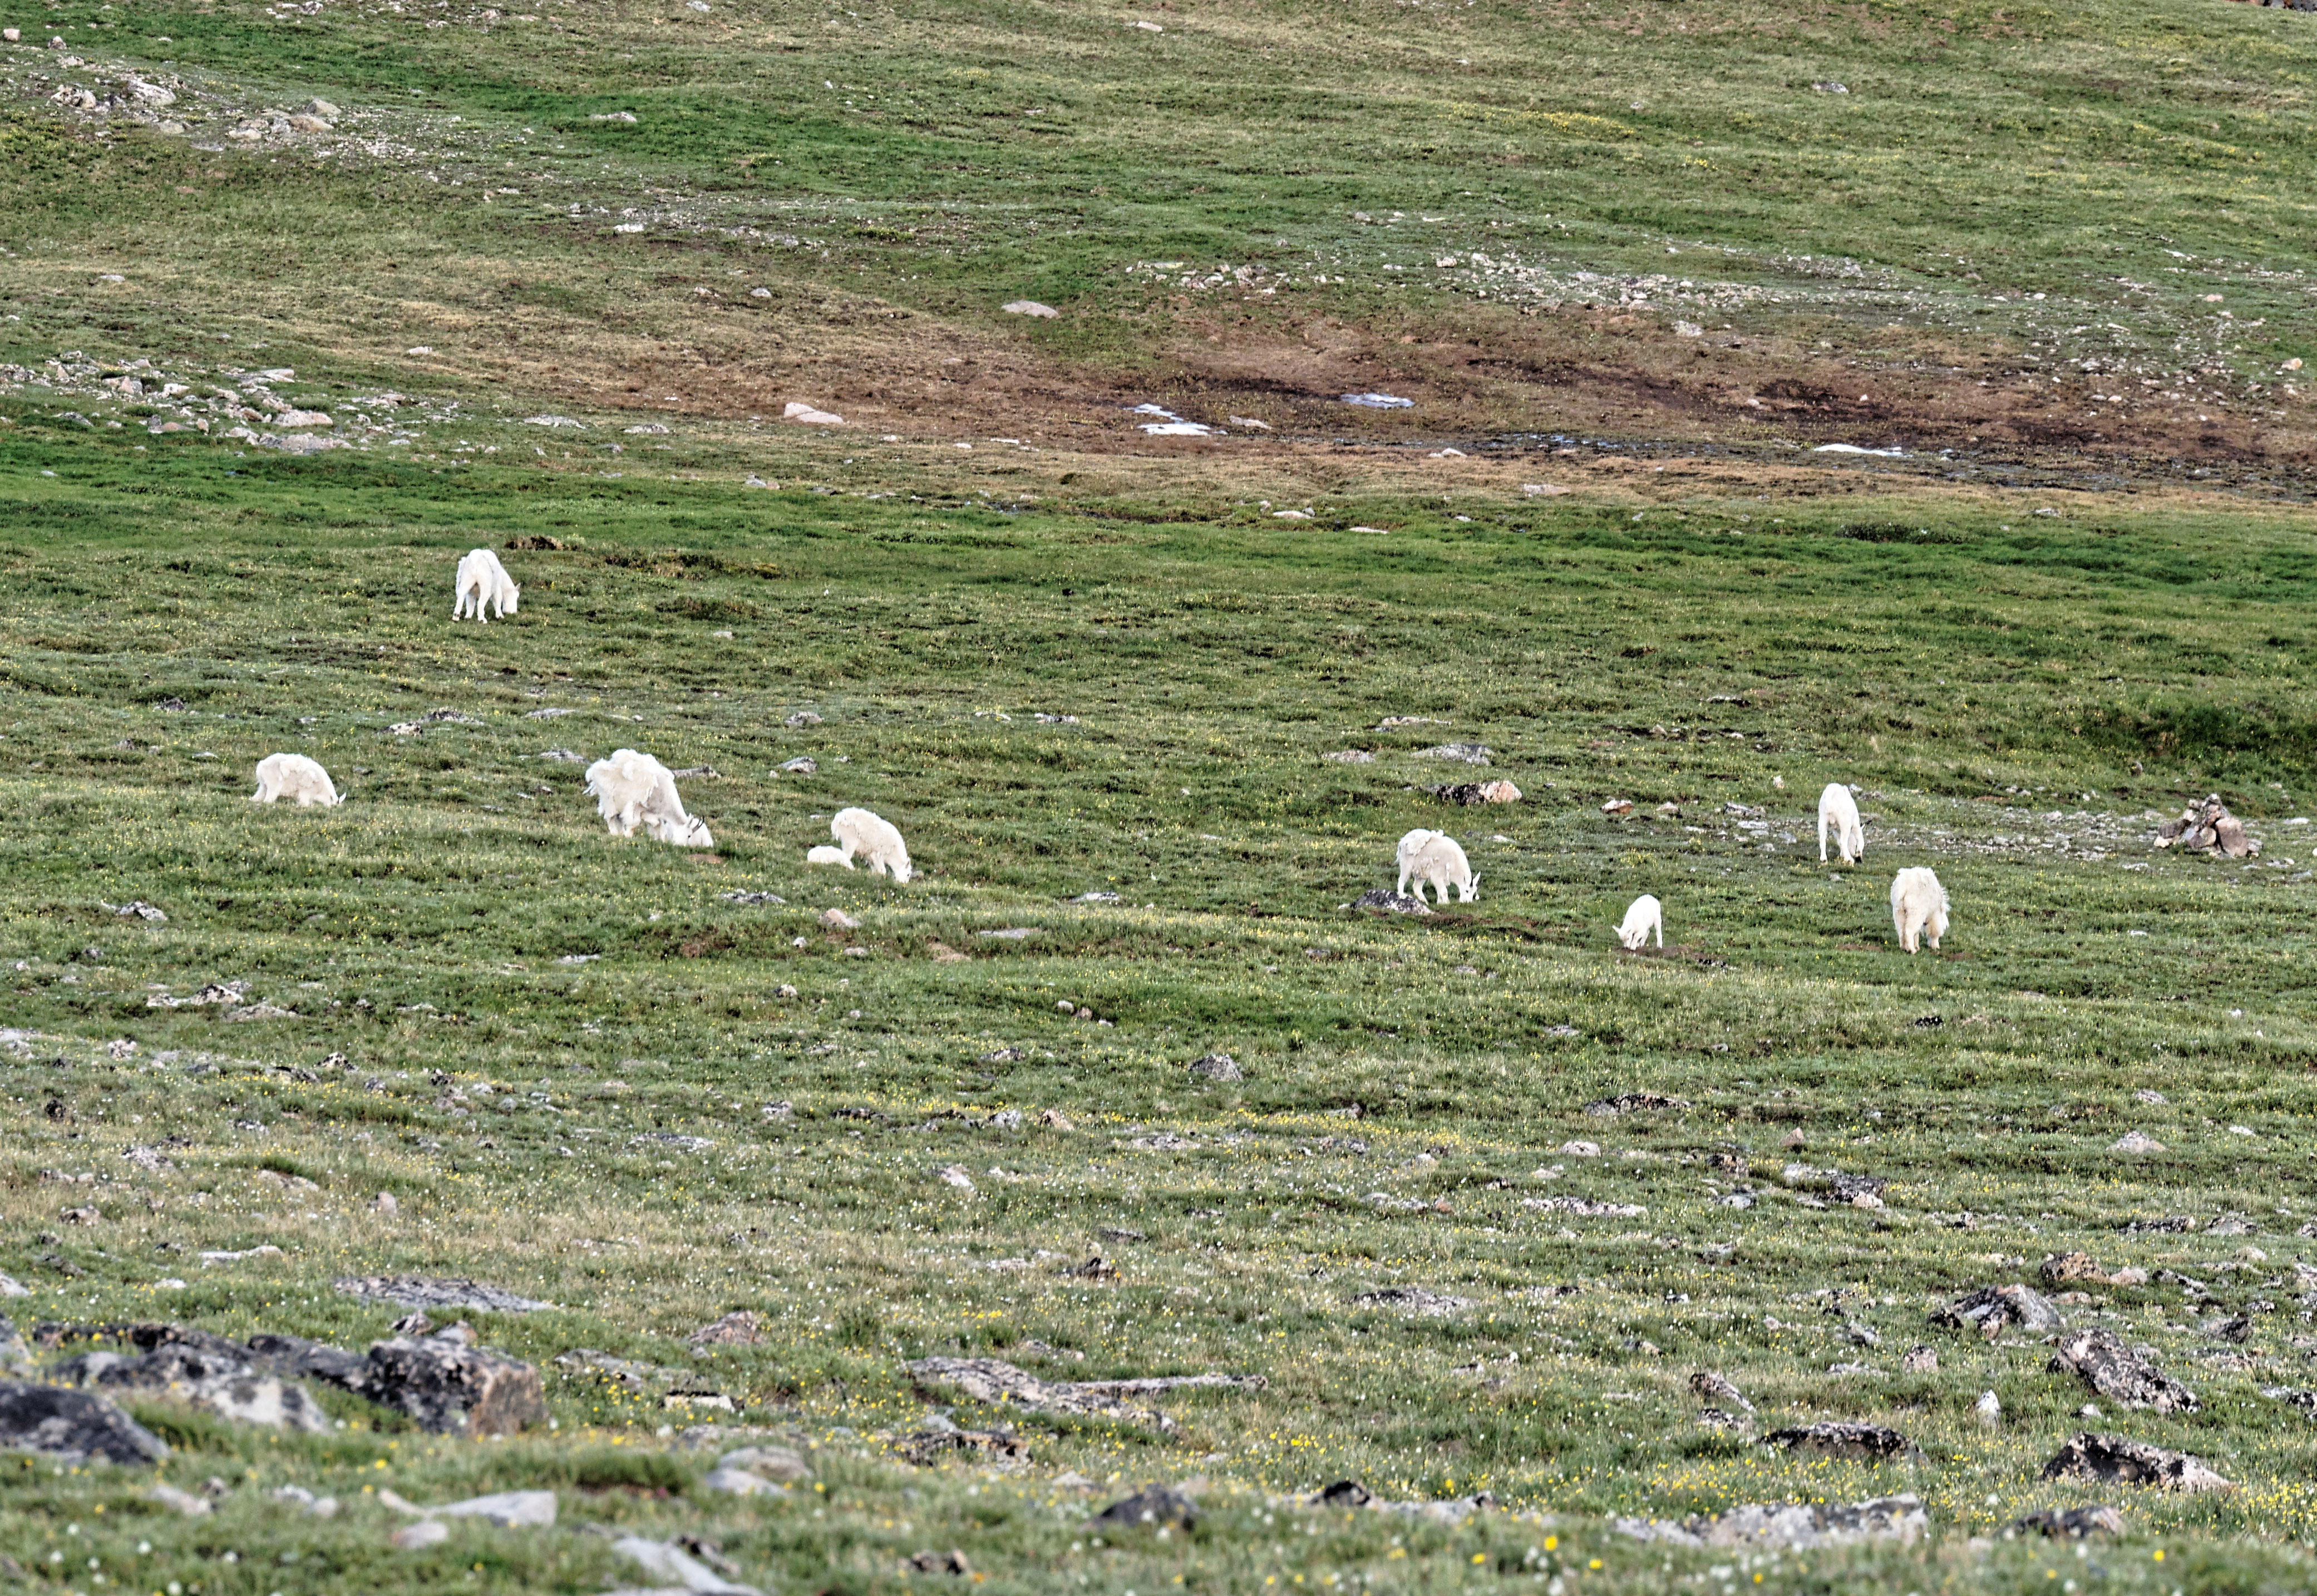 Shedding mountain goats on the Beartooth Plateau.   Mountain goats are not native and were  introduced into the Absaroka and Madison Mountains in the 1940's and 1950's.